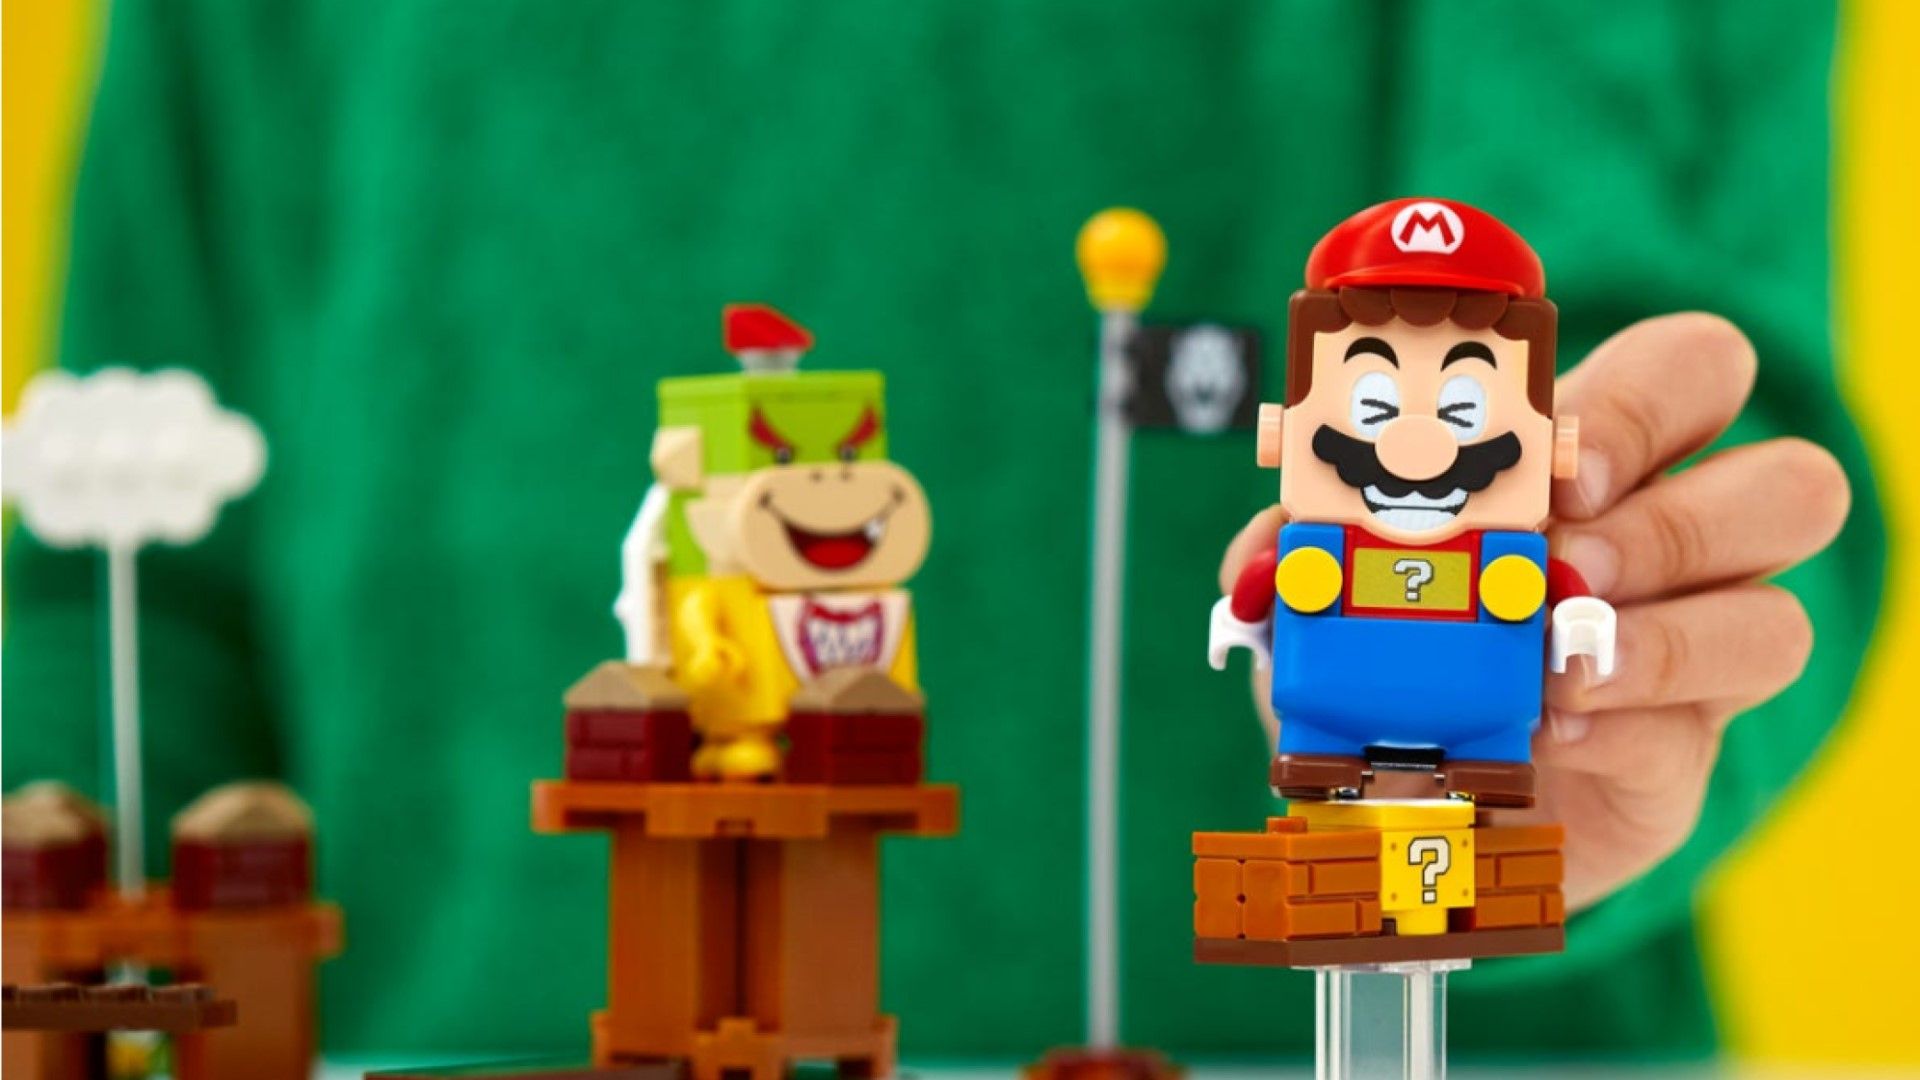 Lego Super Mario's app is a beautiful building space designed by Monument Valley's developer